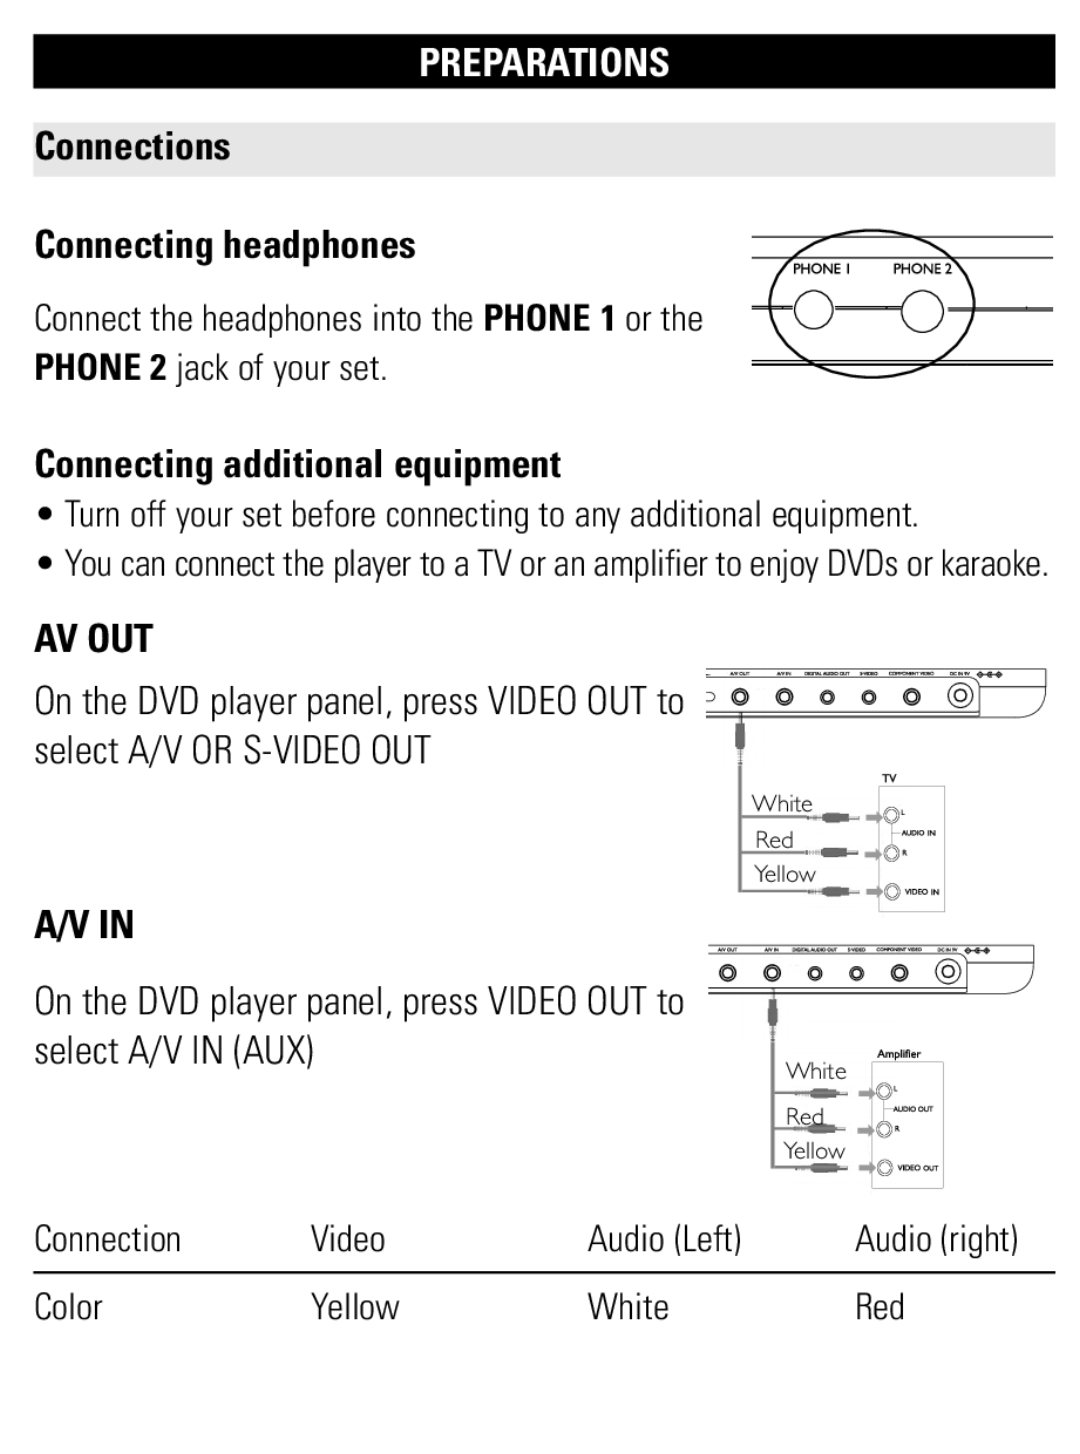 Philips PET1002 Connections Connecting headphones, Connecting additional equipment, Av Out, A/V In, Video, Audio Left 